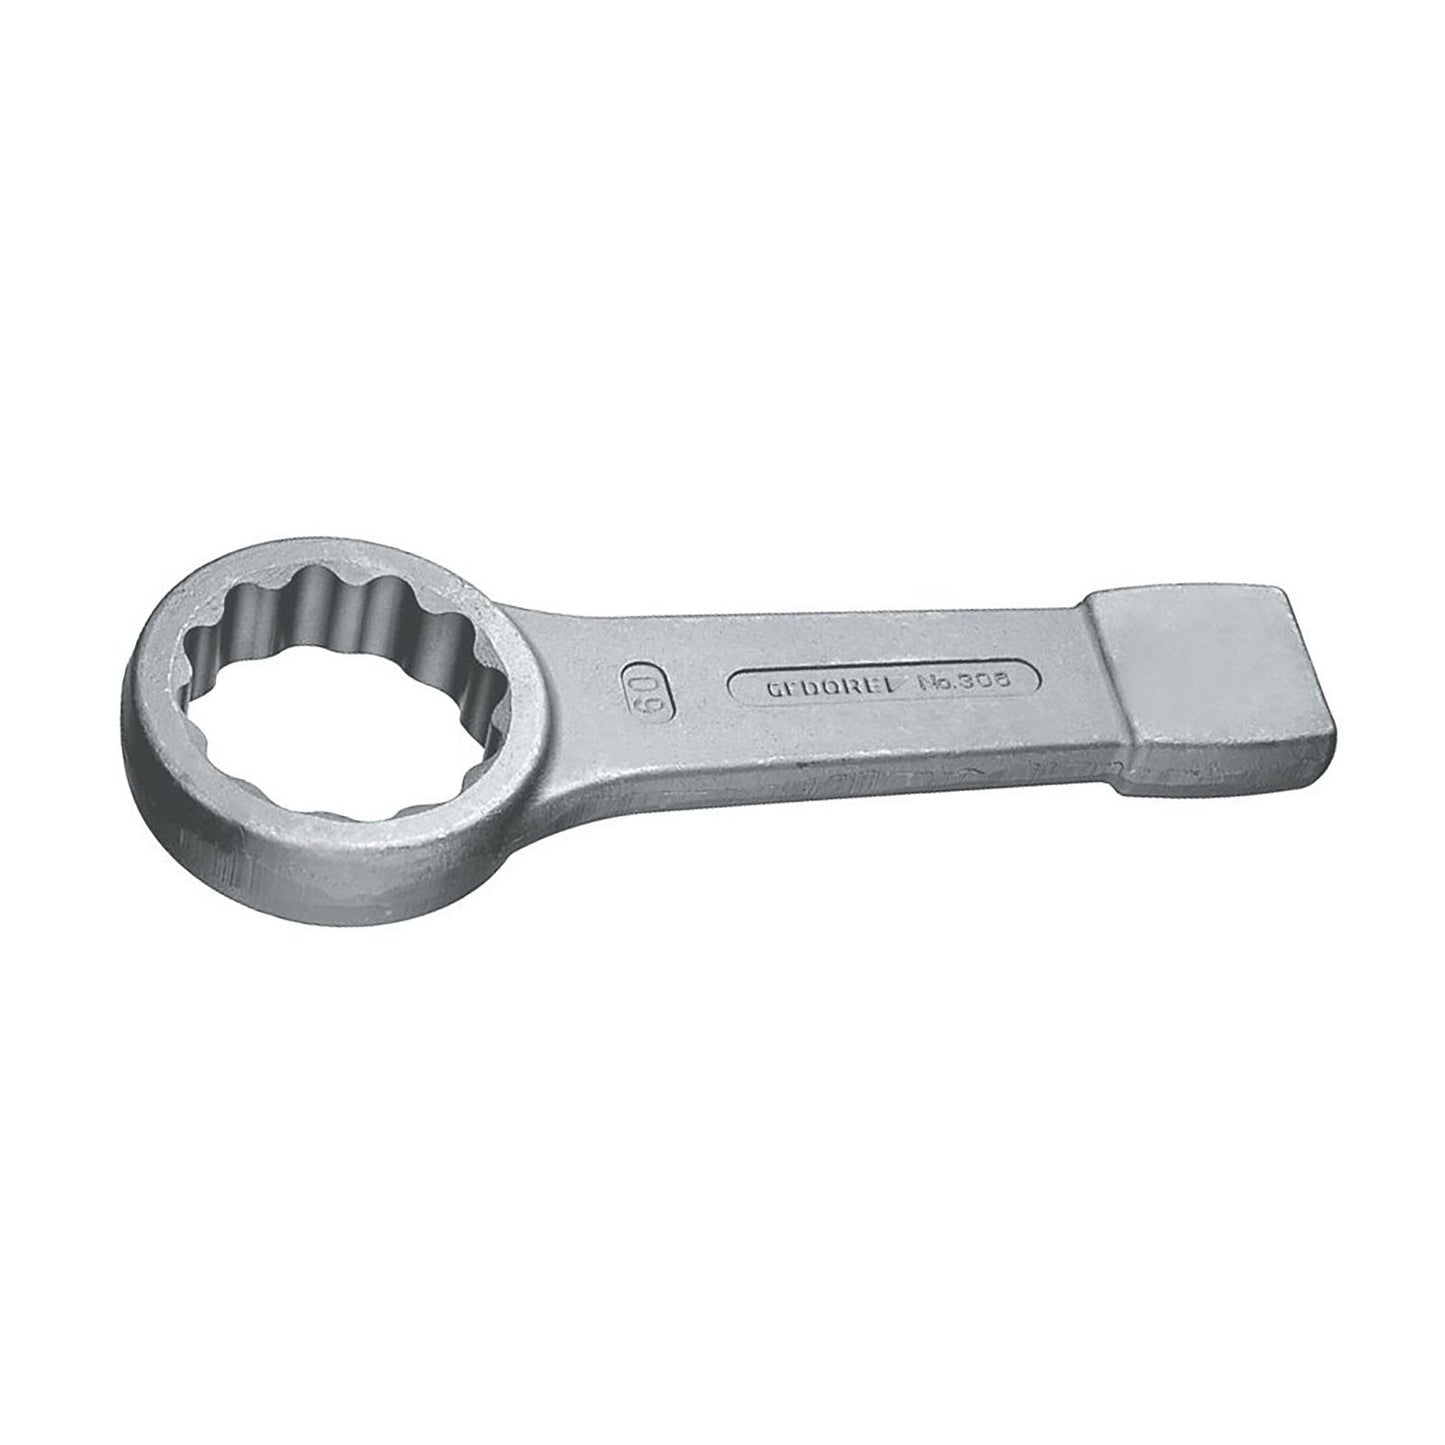 GEDORE 306 70 - Closed Strike Wrench, 70mm (6476240)